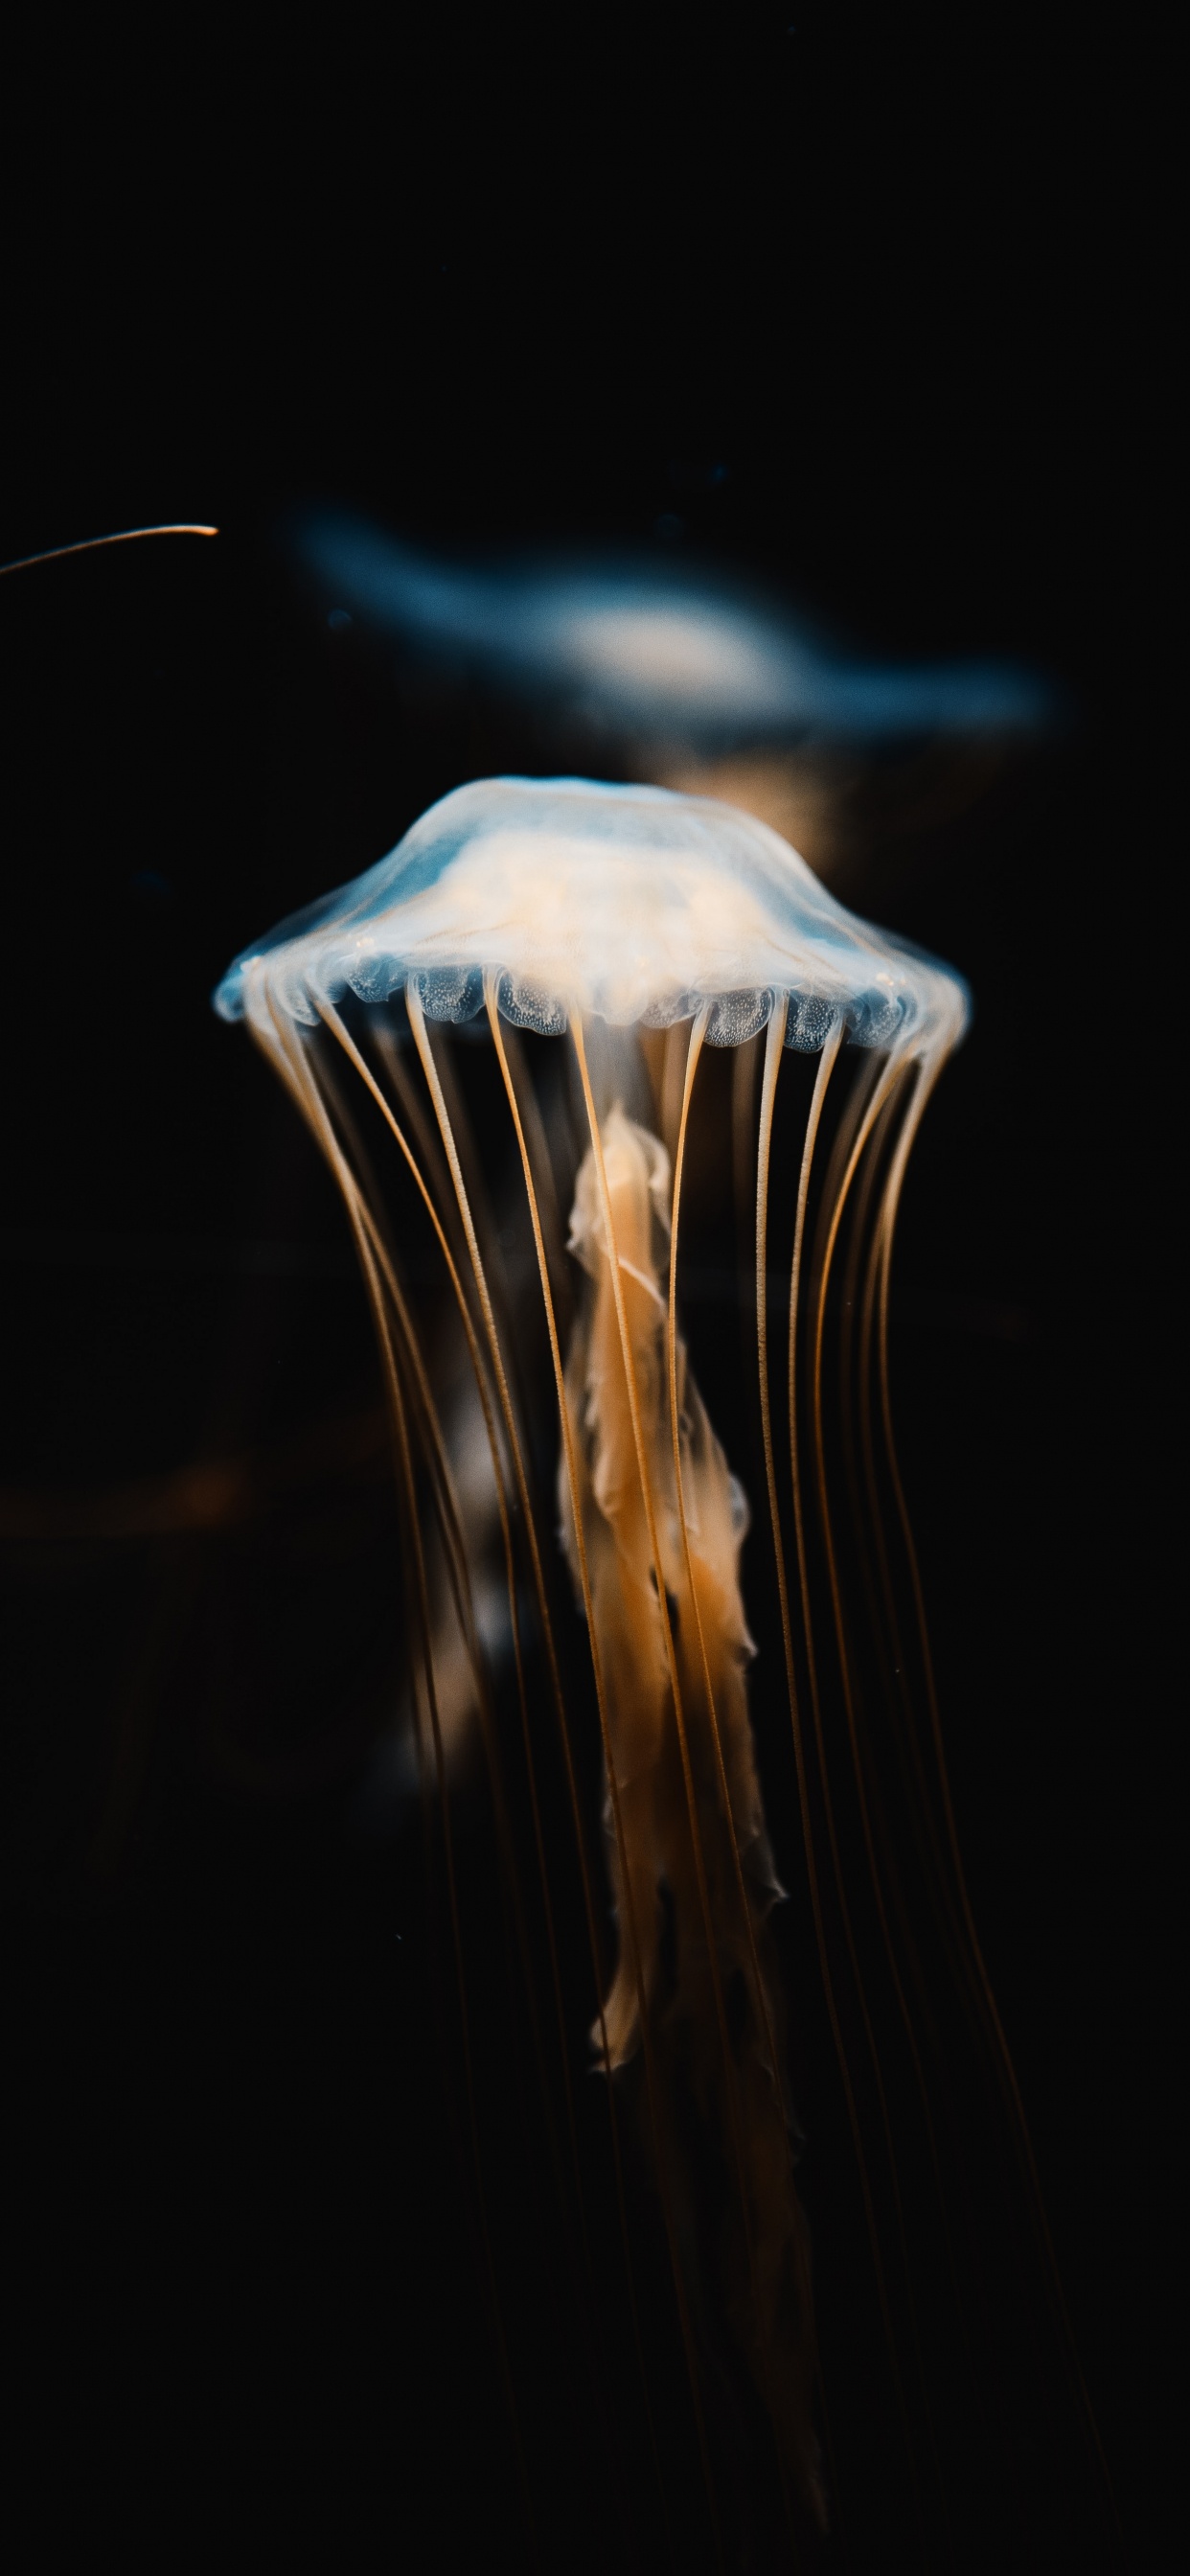 Blue and White Jellyfish in Dark Room. Wallpaper in 1242x2688 Resolution